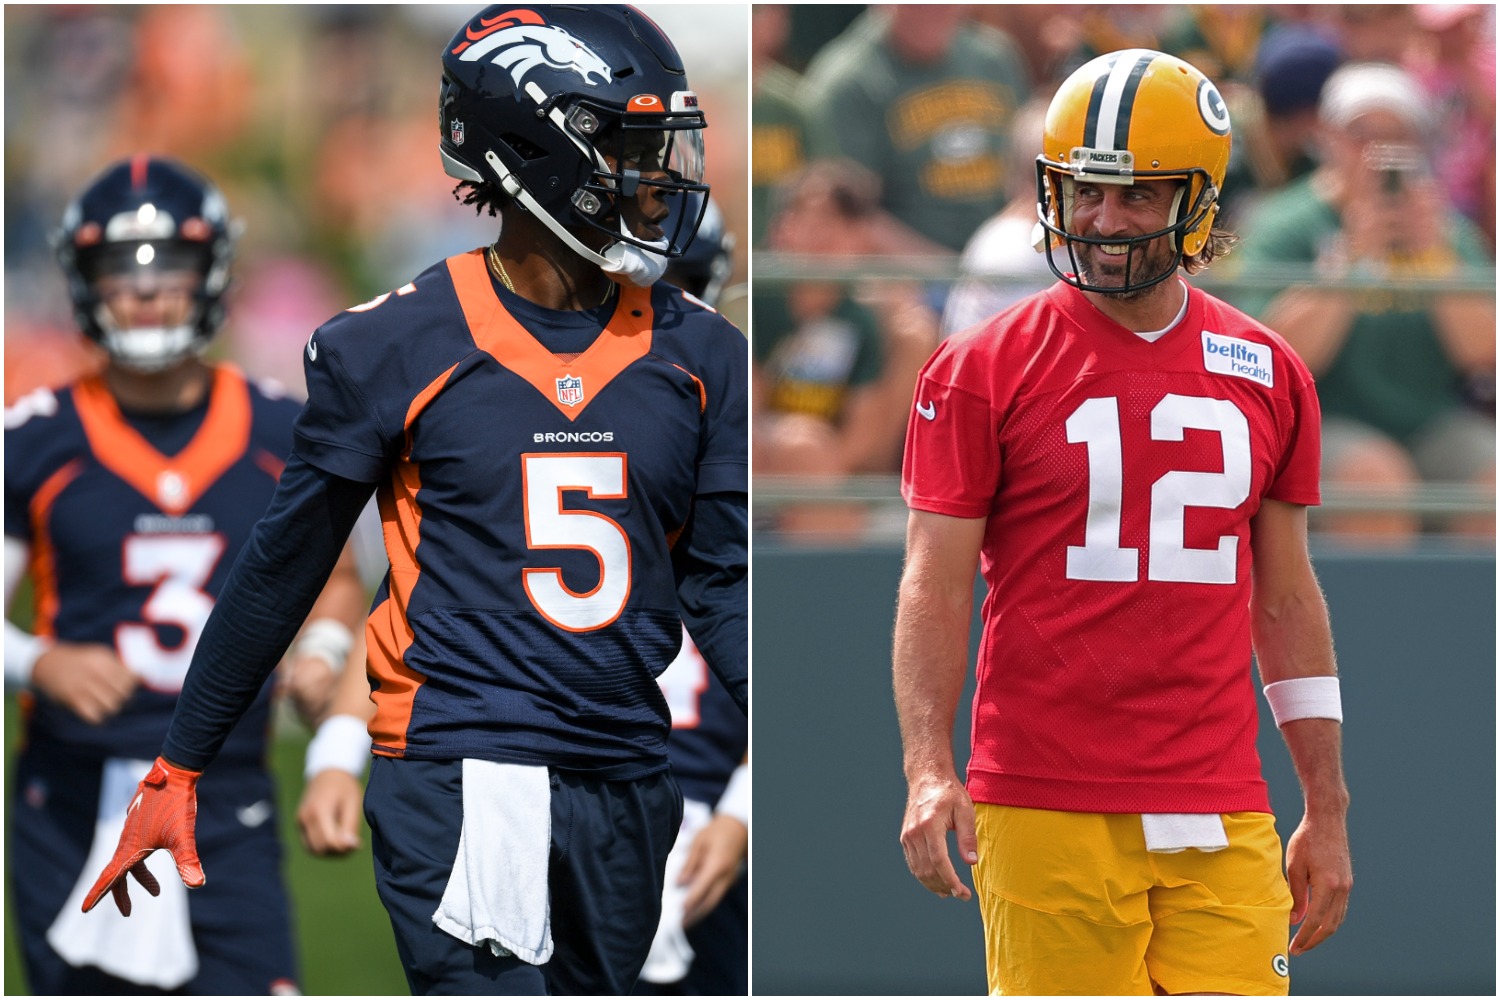 Denver Broncos quarterbacks Teddy Bridgewater (#5) and Drew Lock (#3) go through drills in practice as Green Bay Packers quarterback Aaron Rodgers smiles during his first day of training camp.